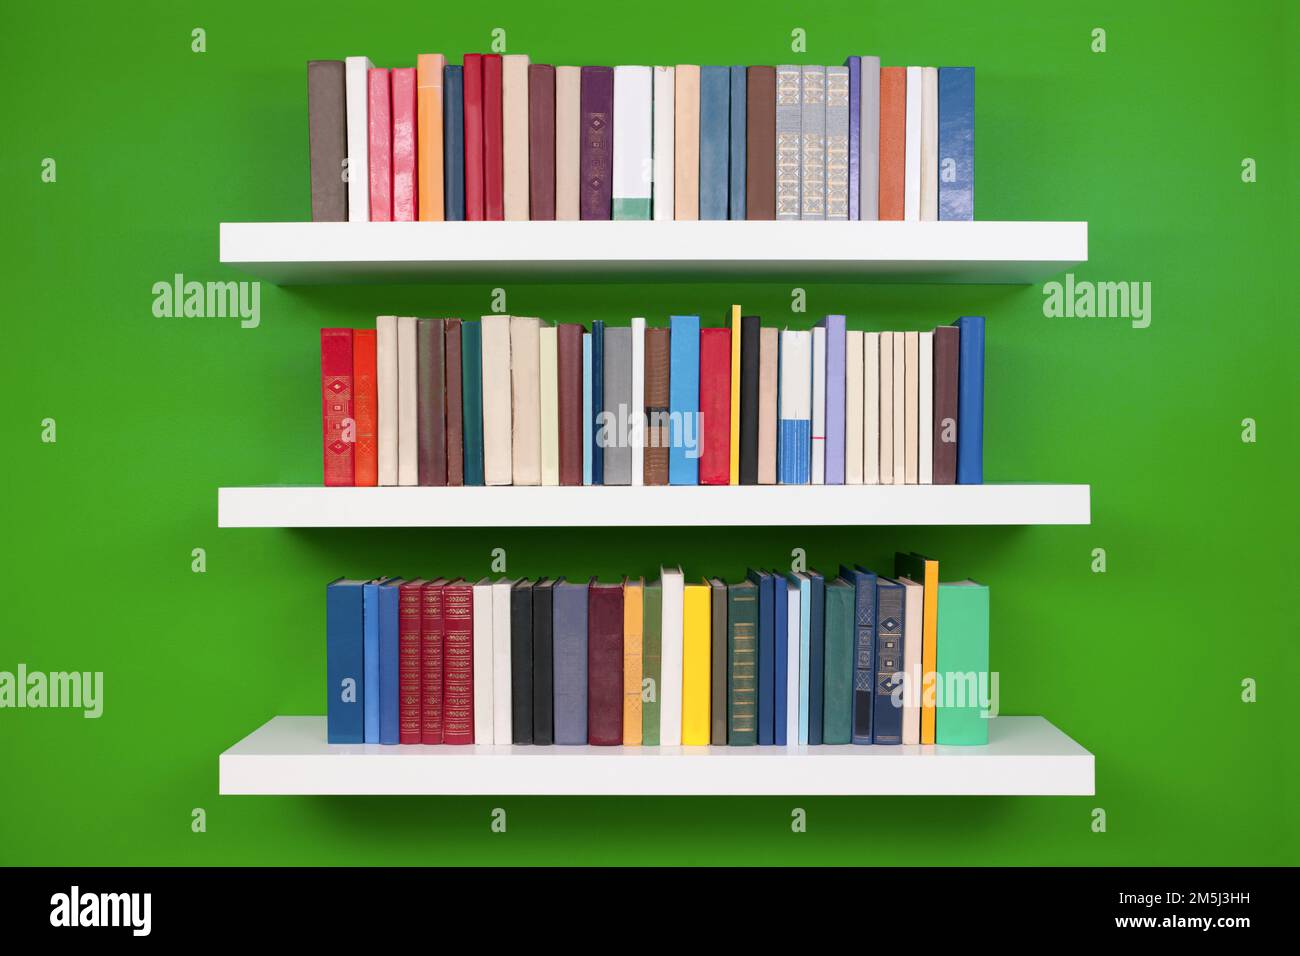 neat rows of books on white shelves against a green wall Stock Photo